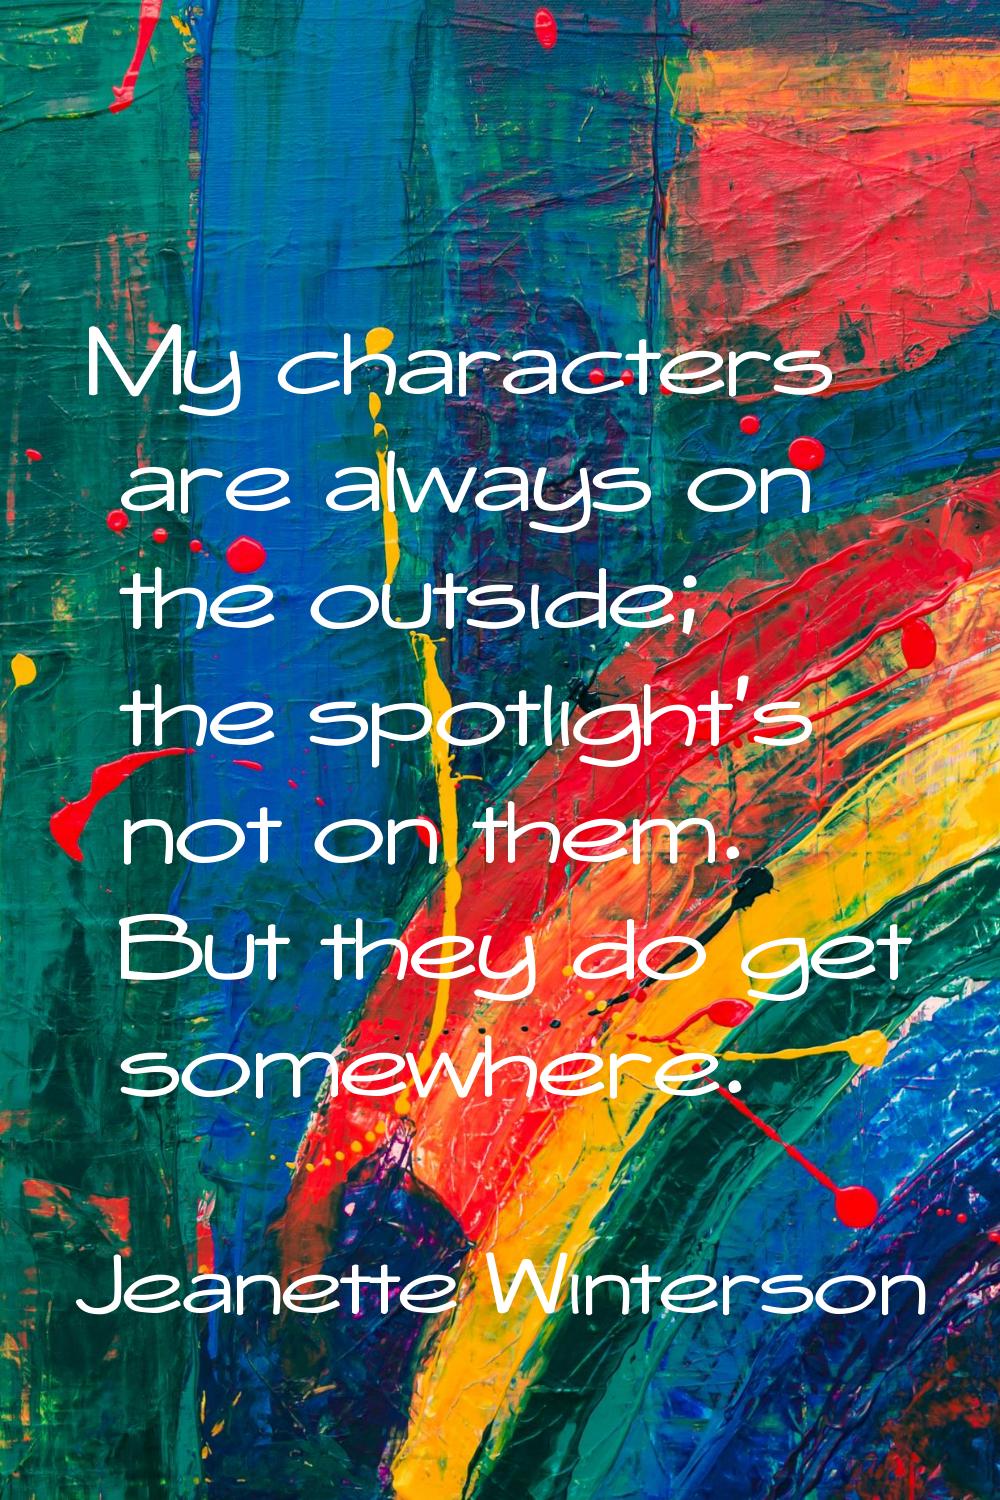 My characters are always on the outside; the spotlight's not on them. But they do get somewhere.